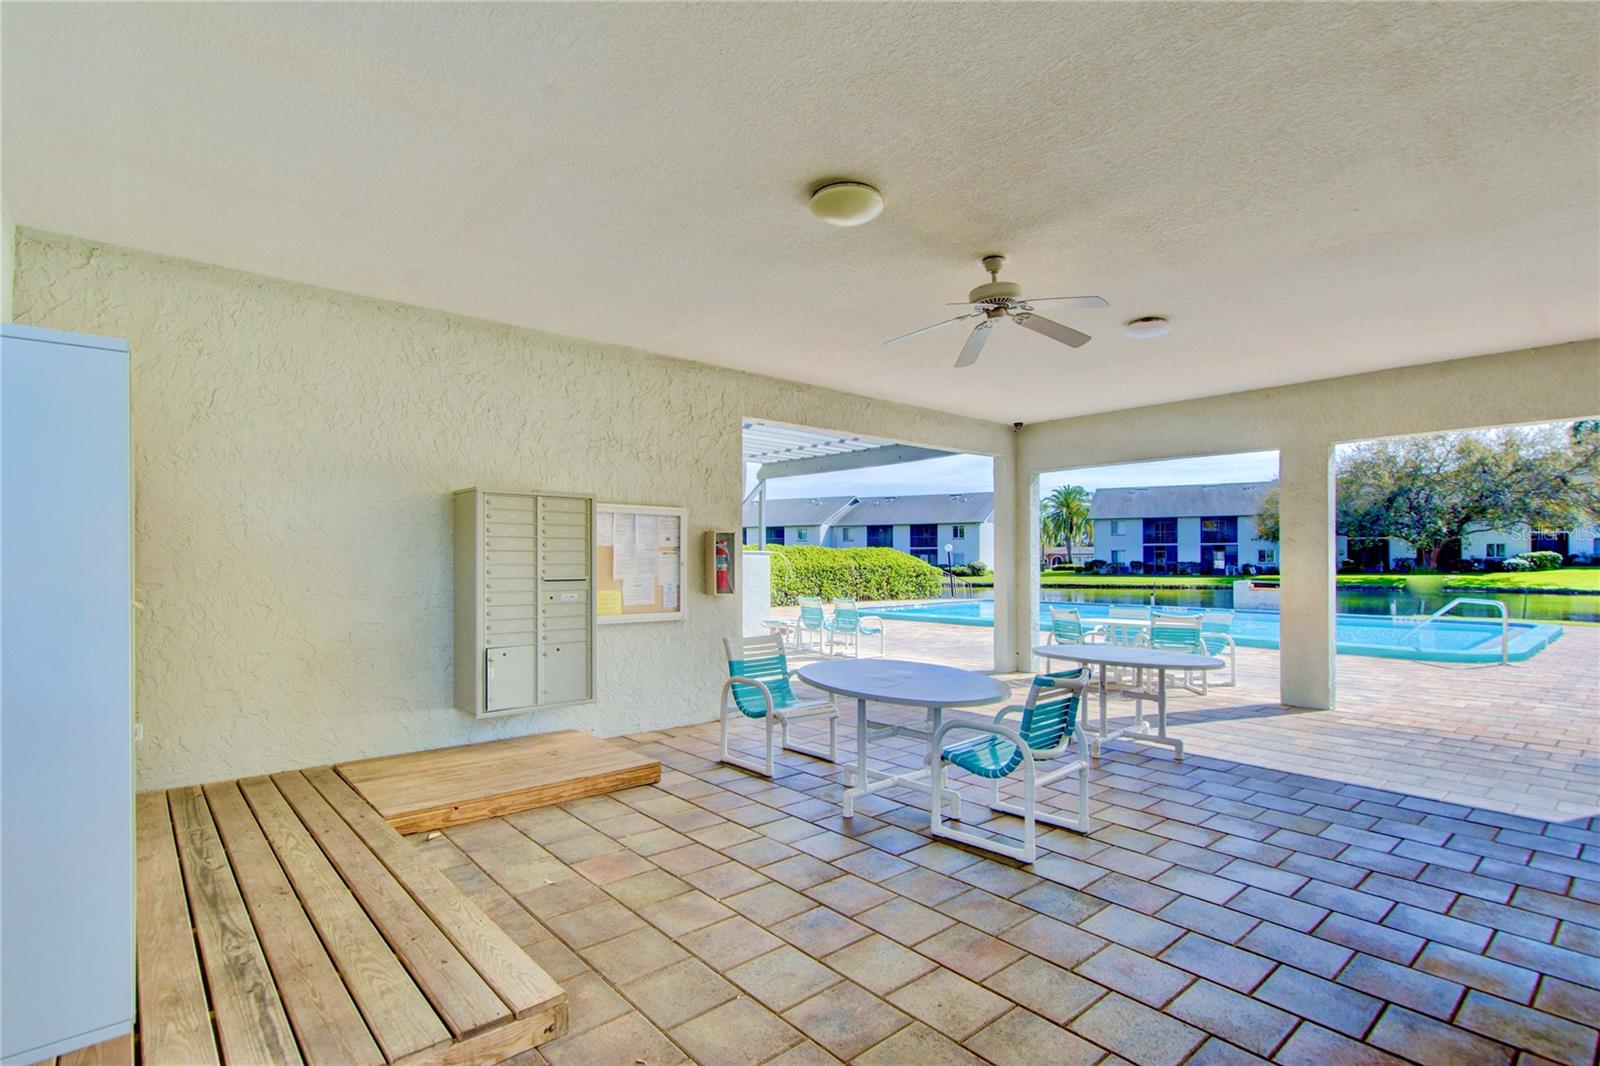 Owners private mailboxes in shady poolside terrace located steps away from #167 front door, so convenient!